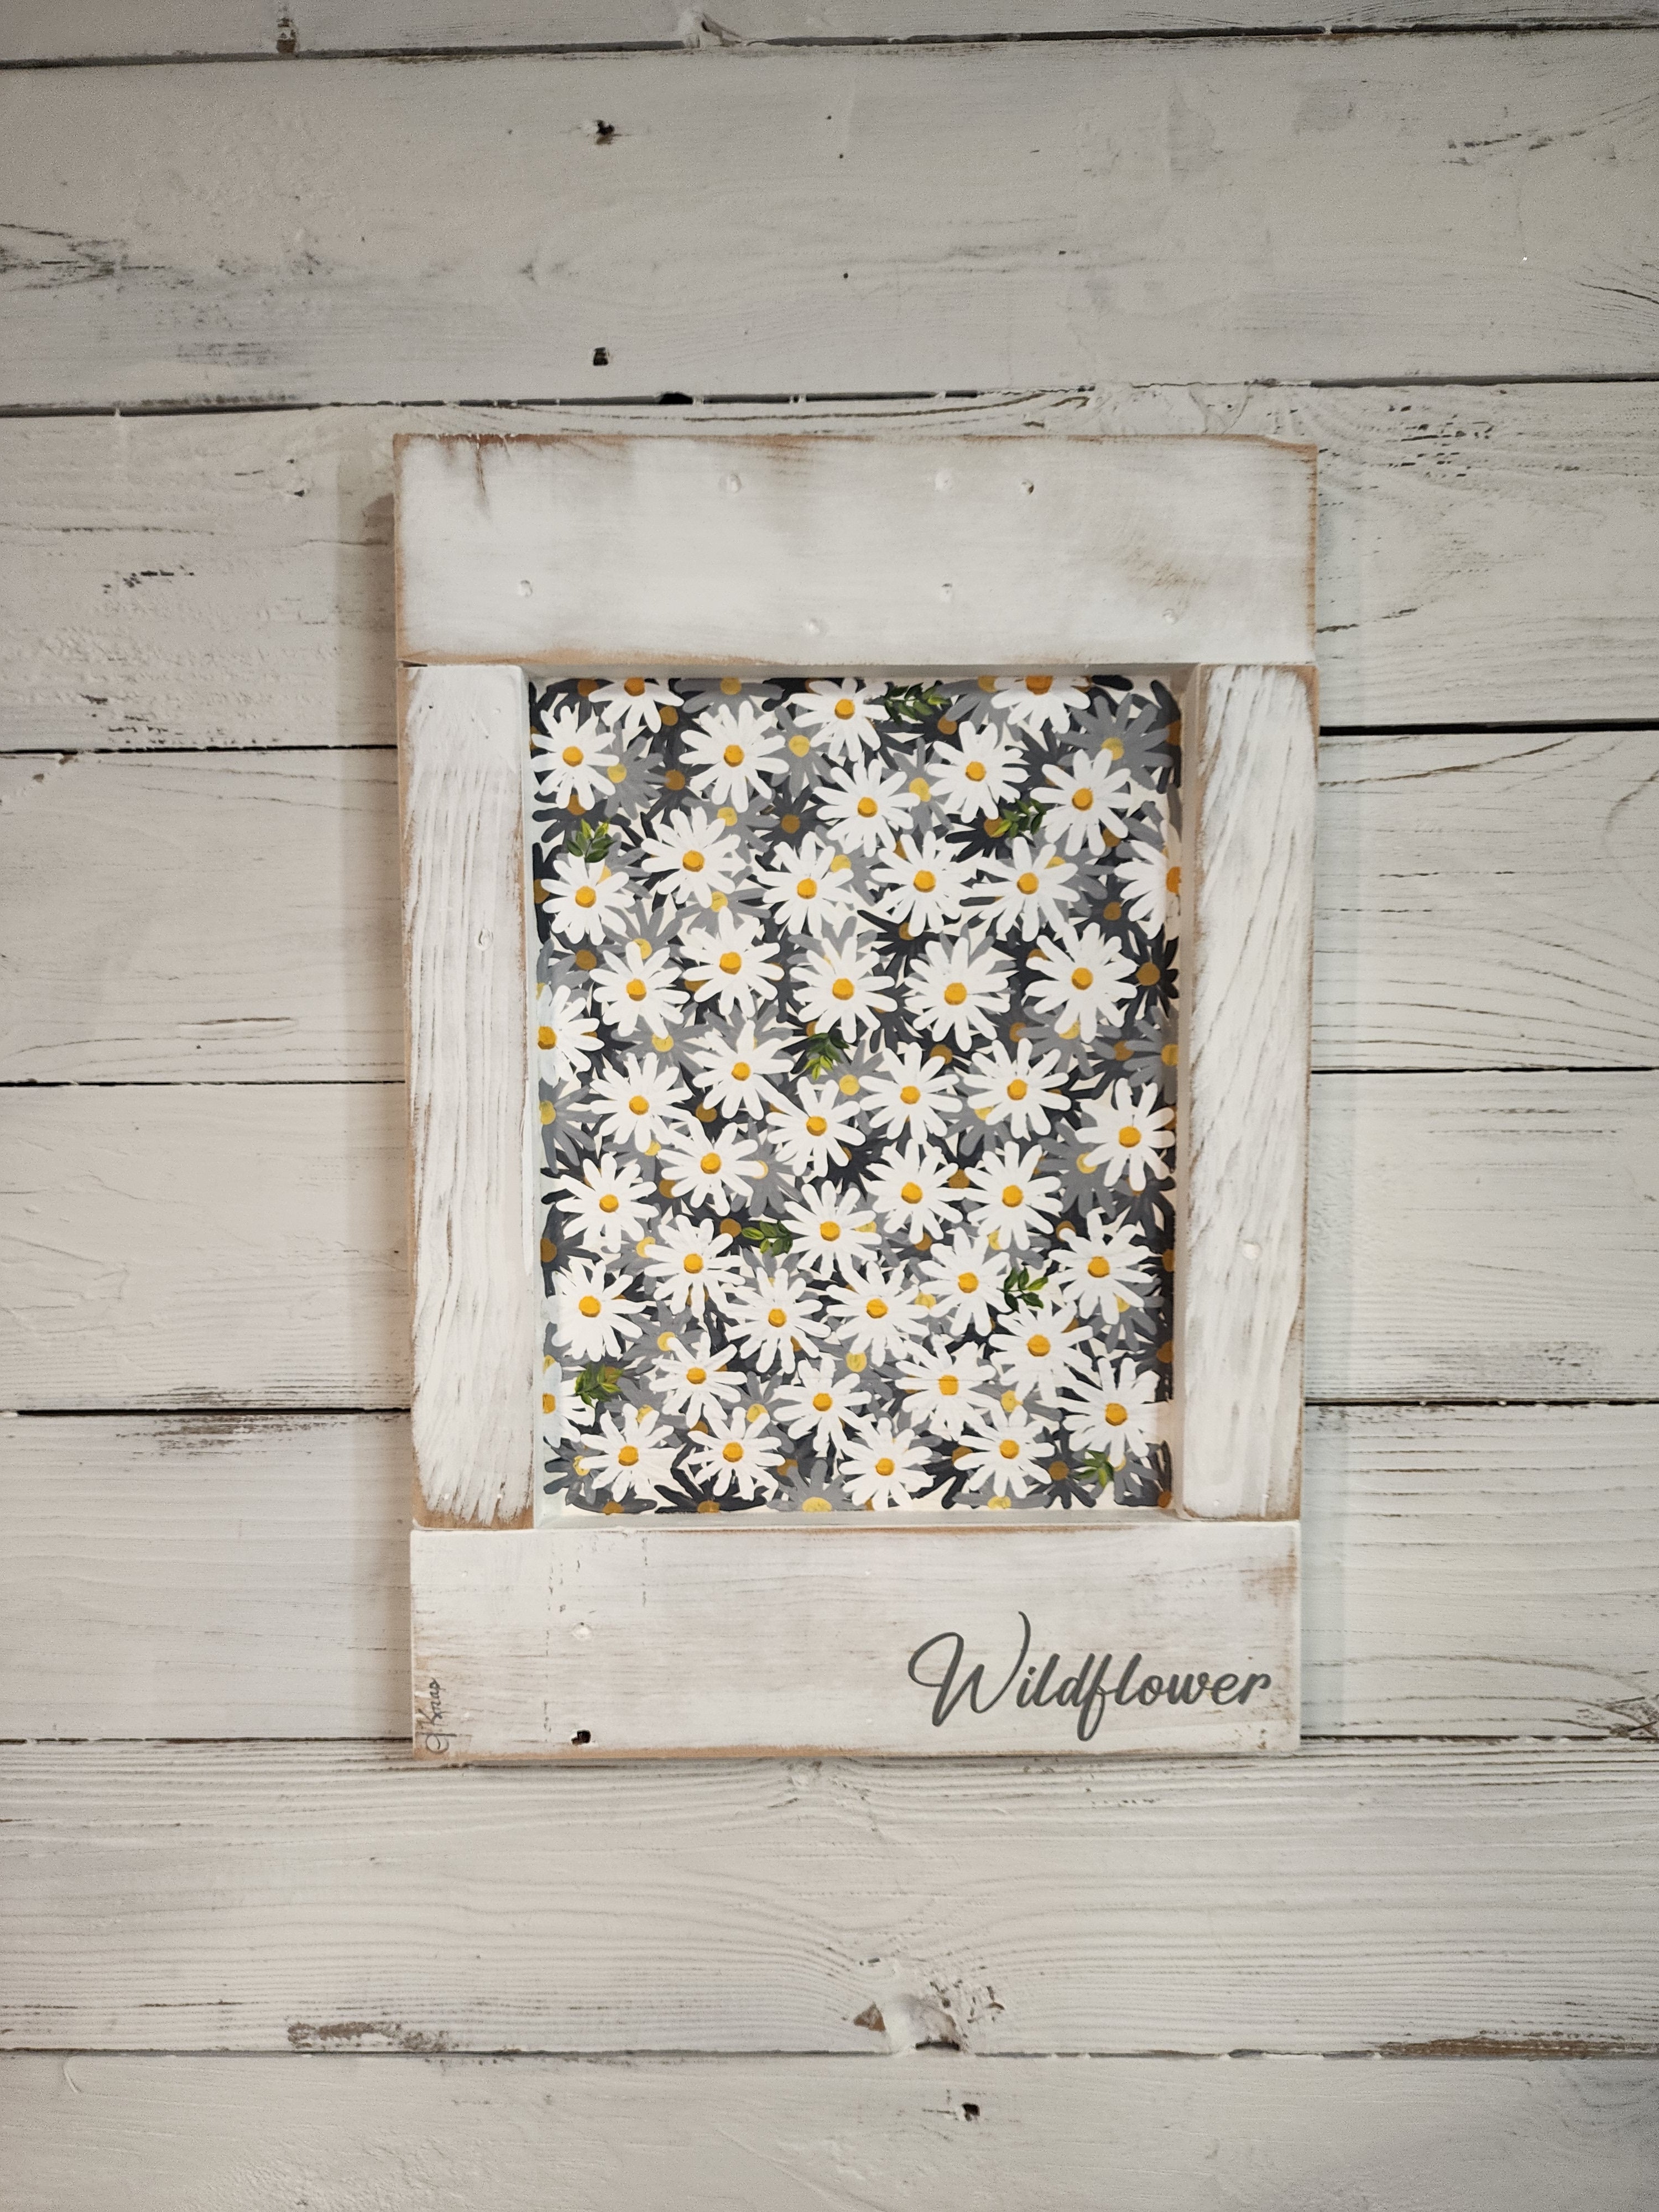 Acrylic floral gray daisy painting on pallet wood, Wildflower, daisy design on farmhouse white background, summer cottage and deck decor artwork